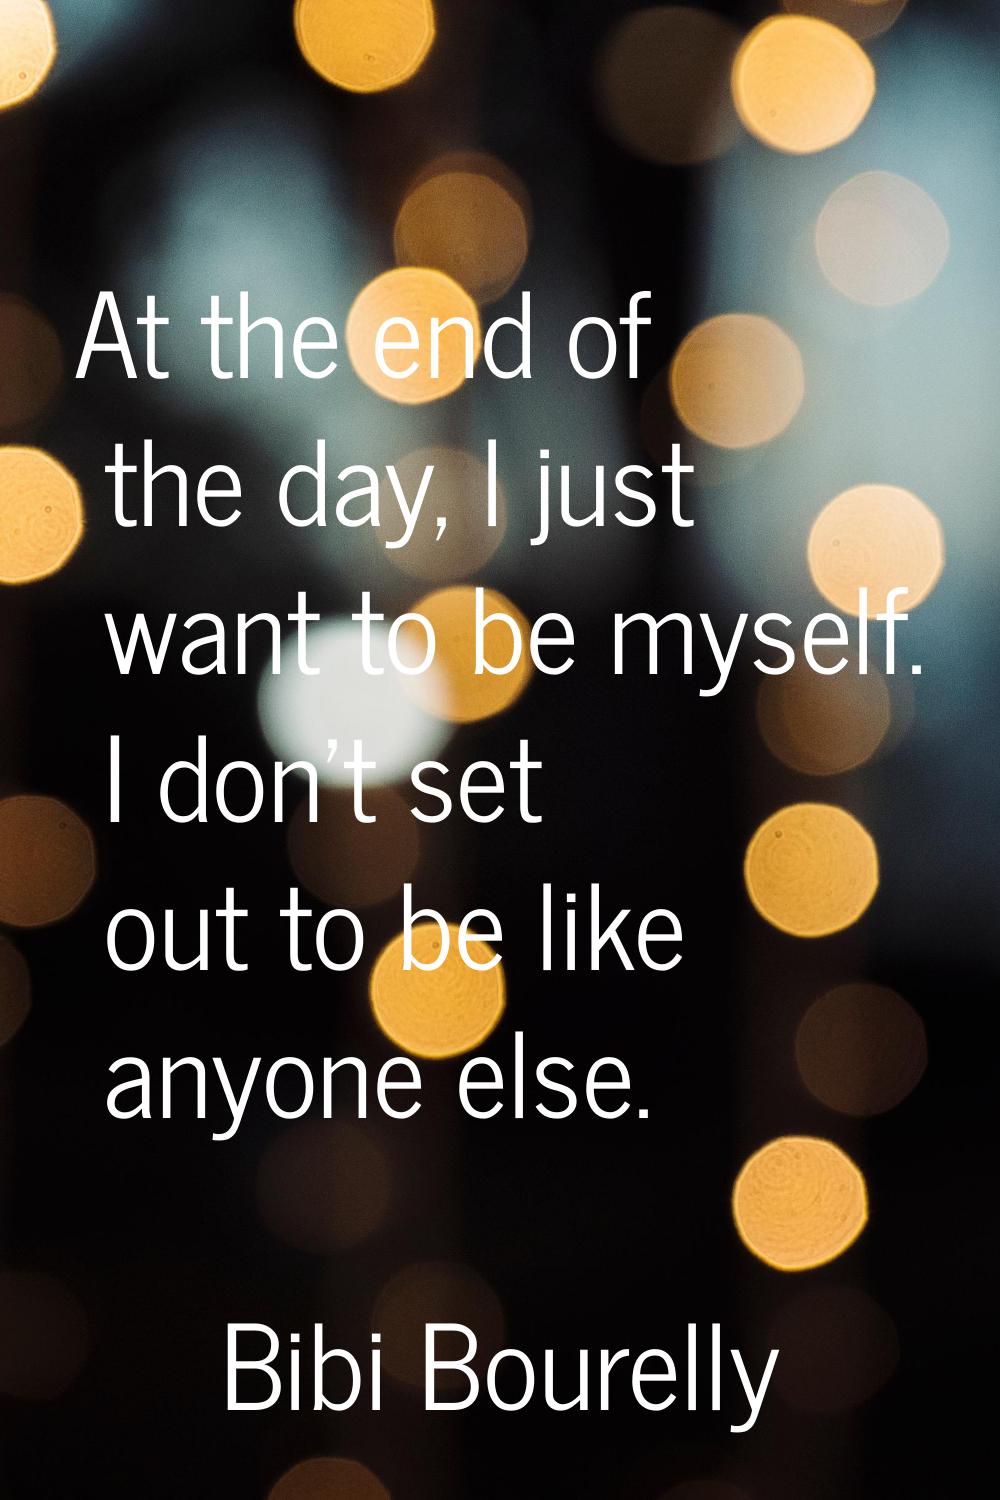 At the end of the day, l just want to be myself. I don't set out to be like anyone else.